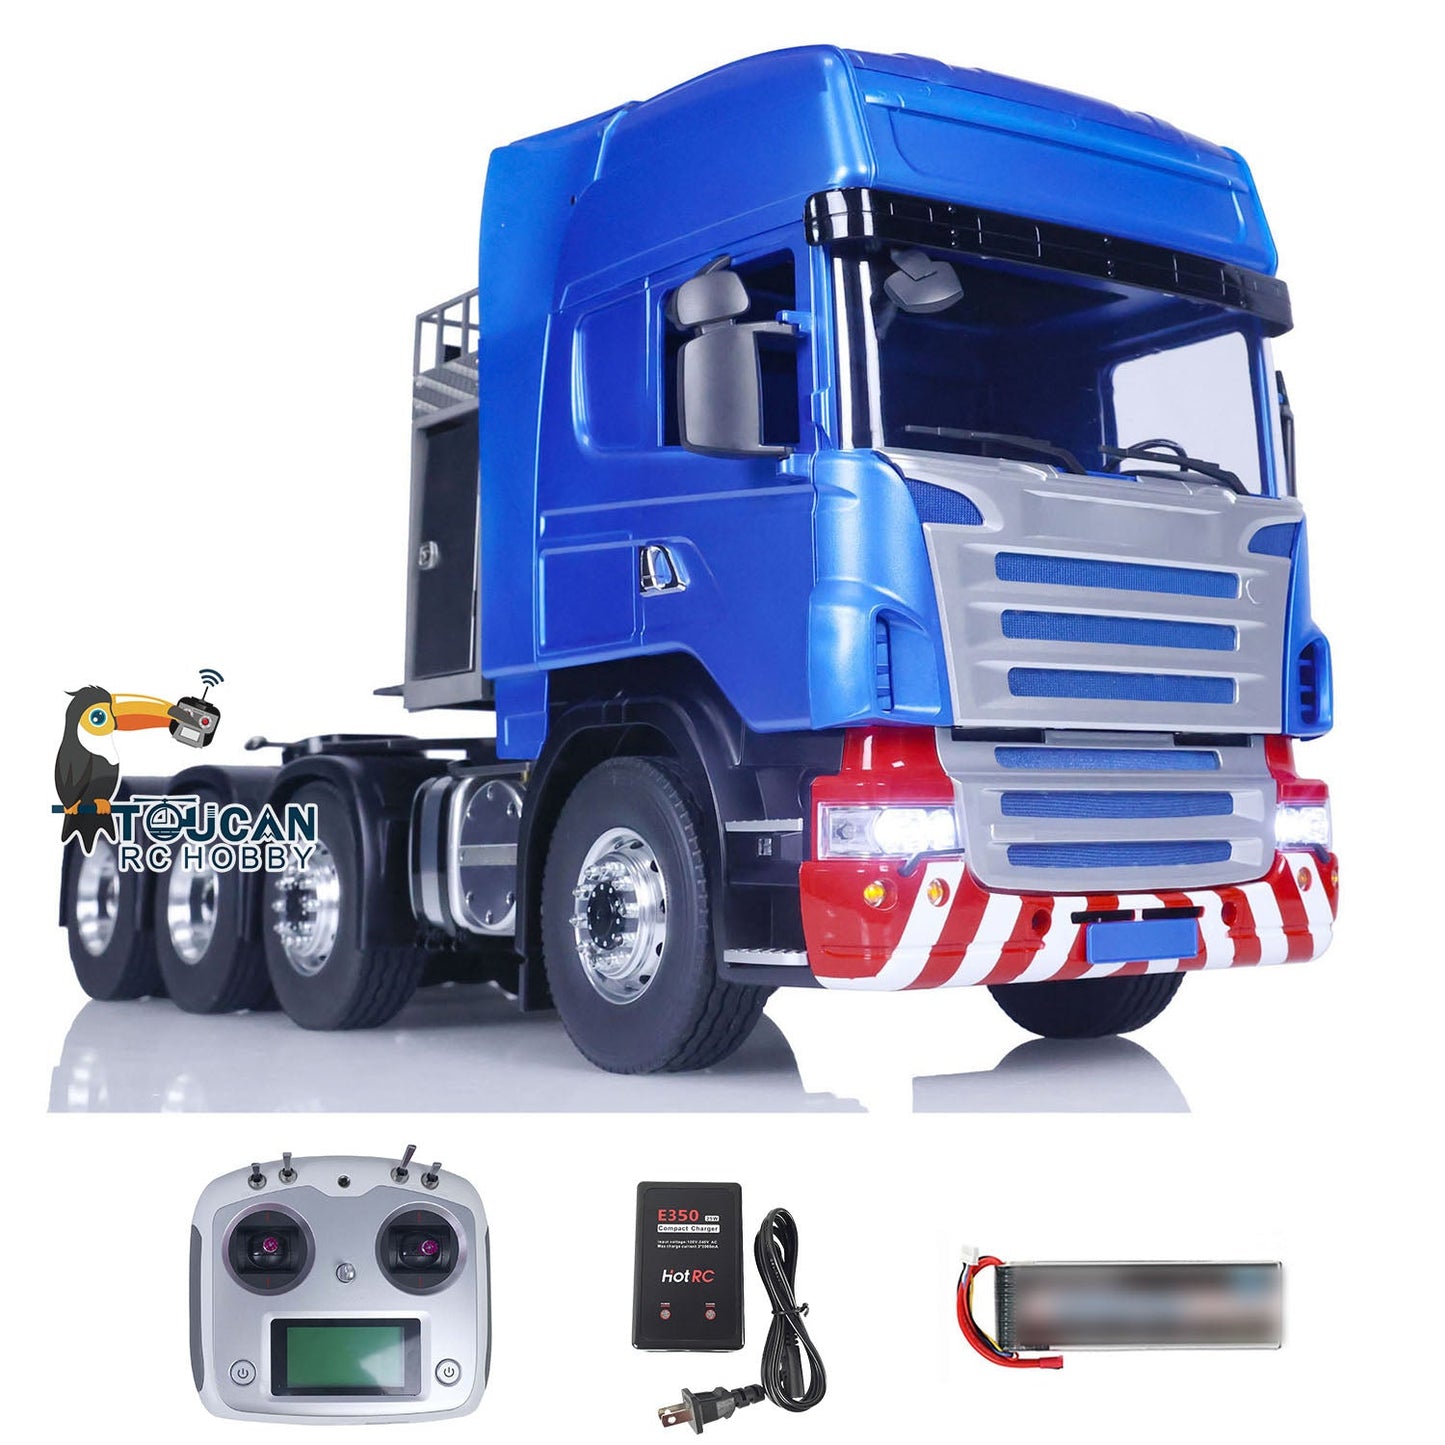 LESU 1/14 RC Tractor Truck 8x8 RTR Remote Controlled Car Hobby Model Construction Vehicle Metal Chassis Sound Lights DIY